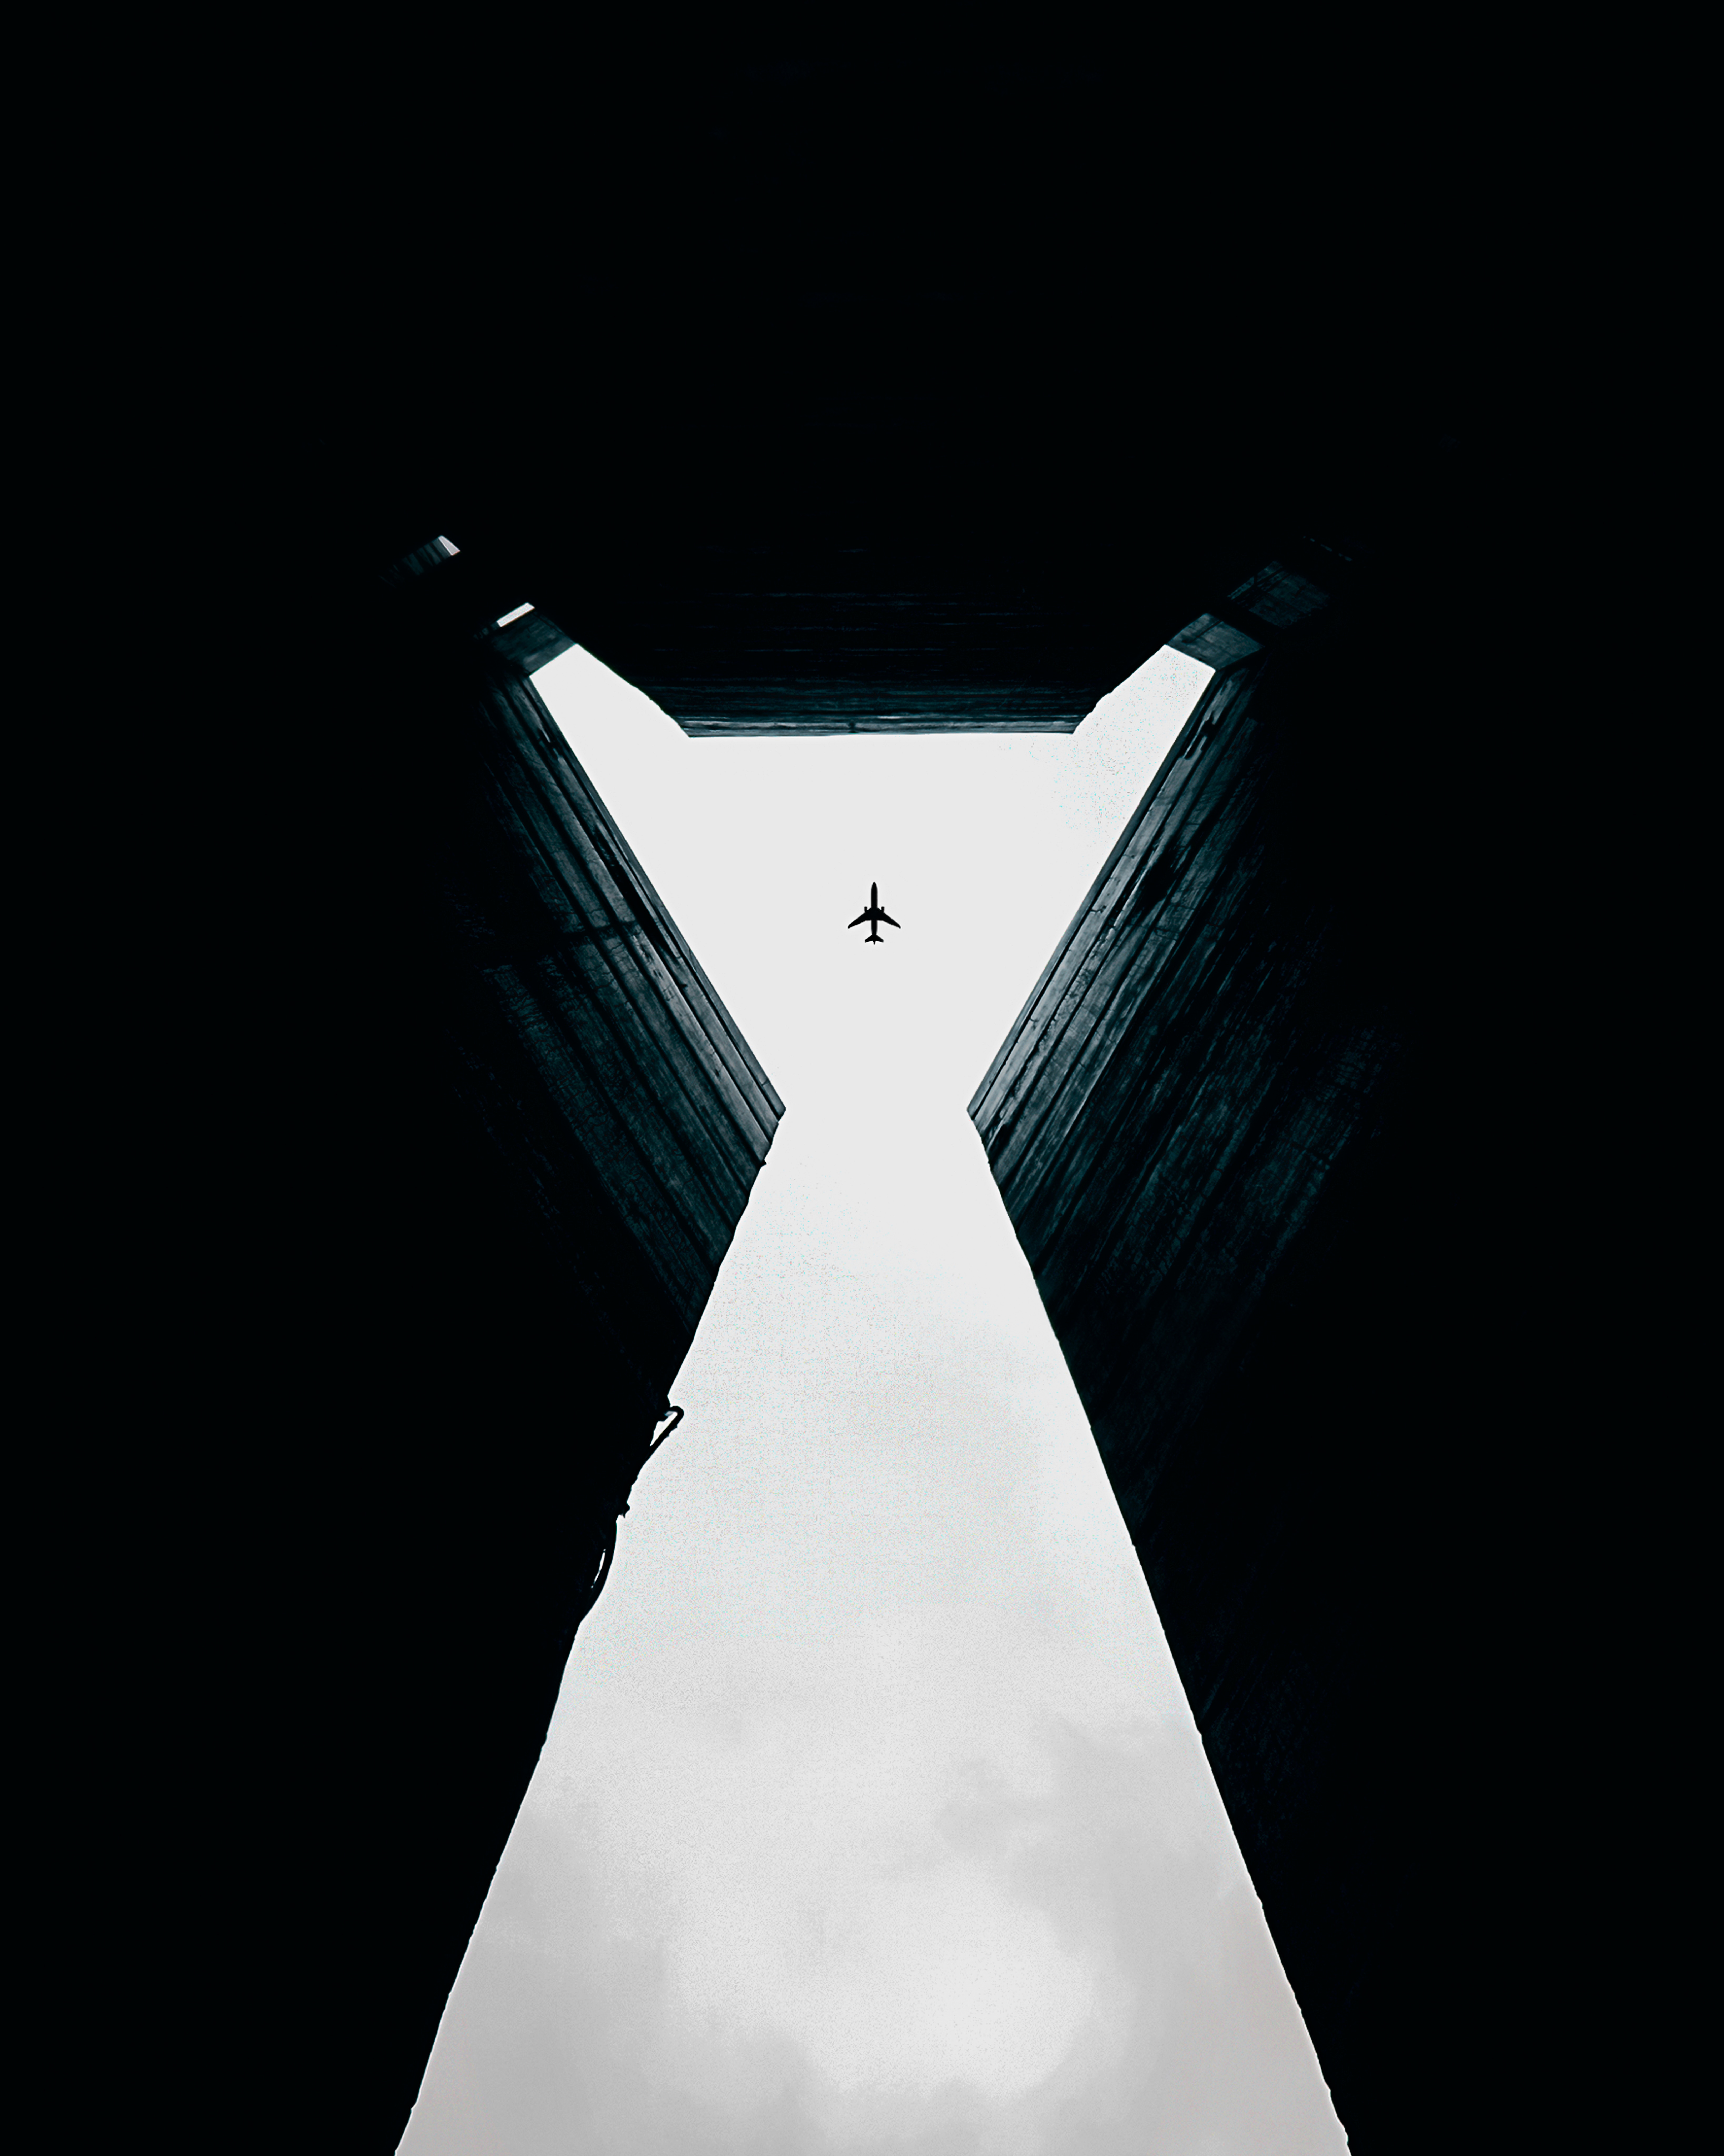 155225 download wallpaper minimalism, sky, walls, building, dark, symmetry, plane, airplane, bottom view, high, opening, aperture screensavers and pictures for free